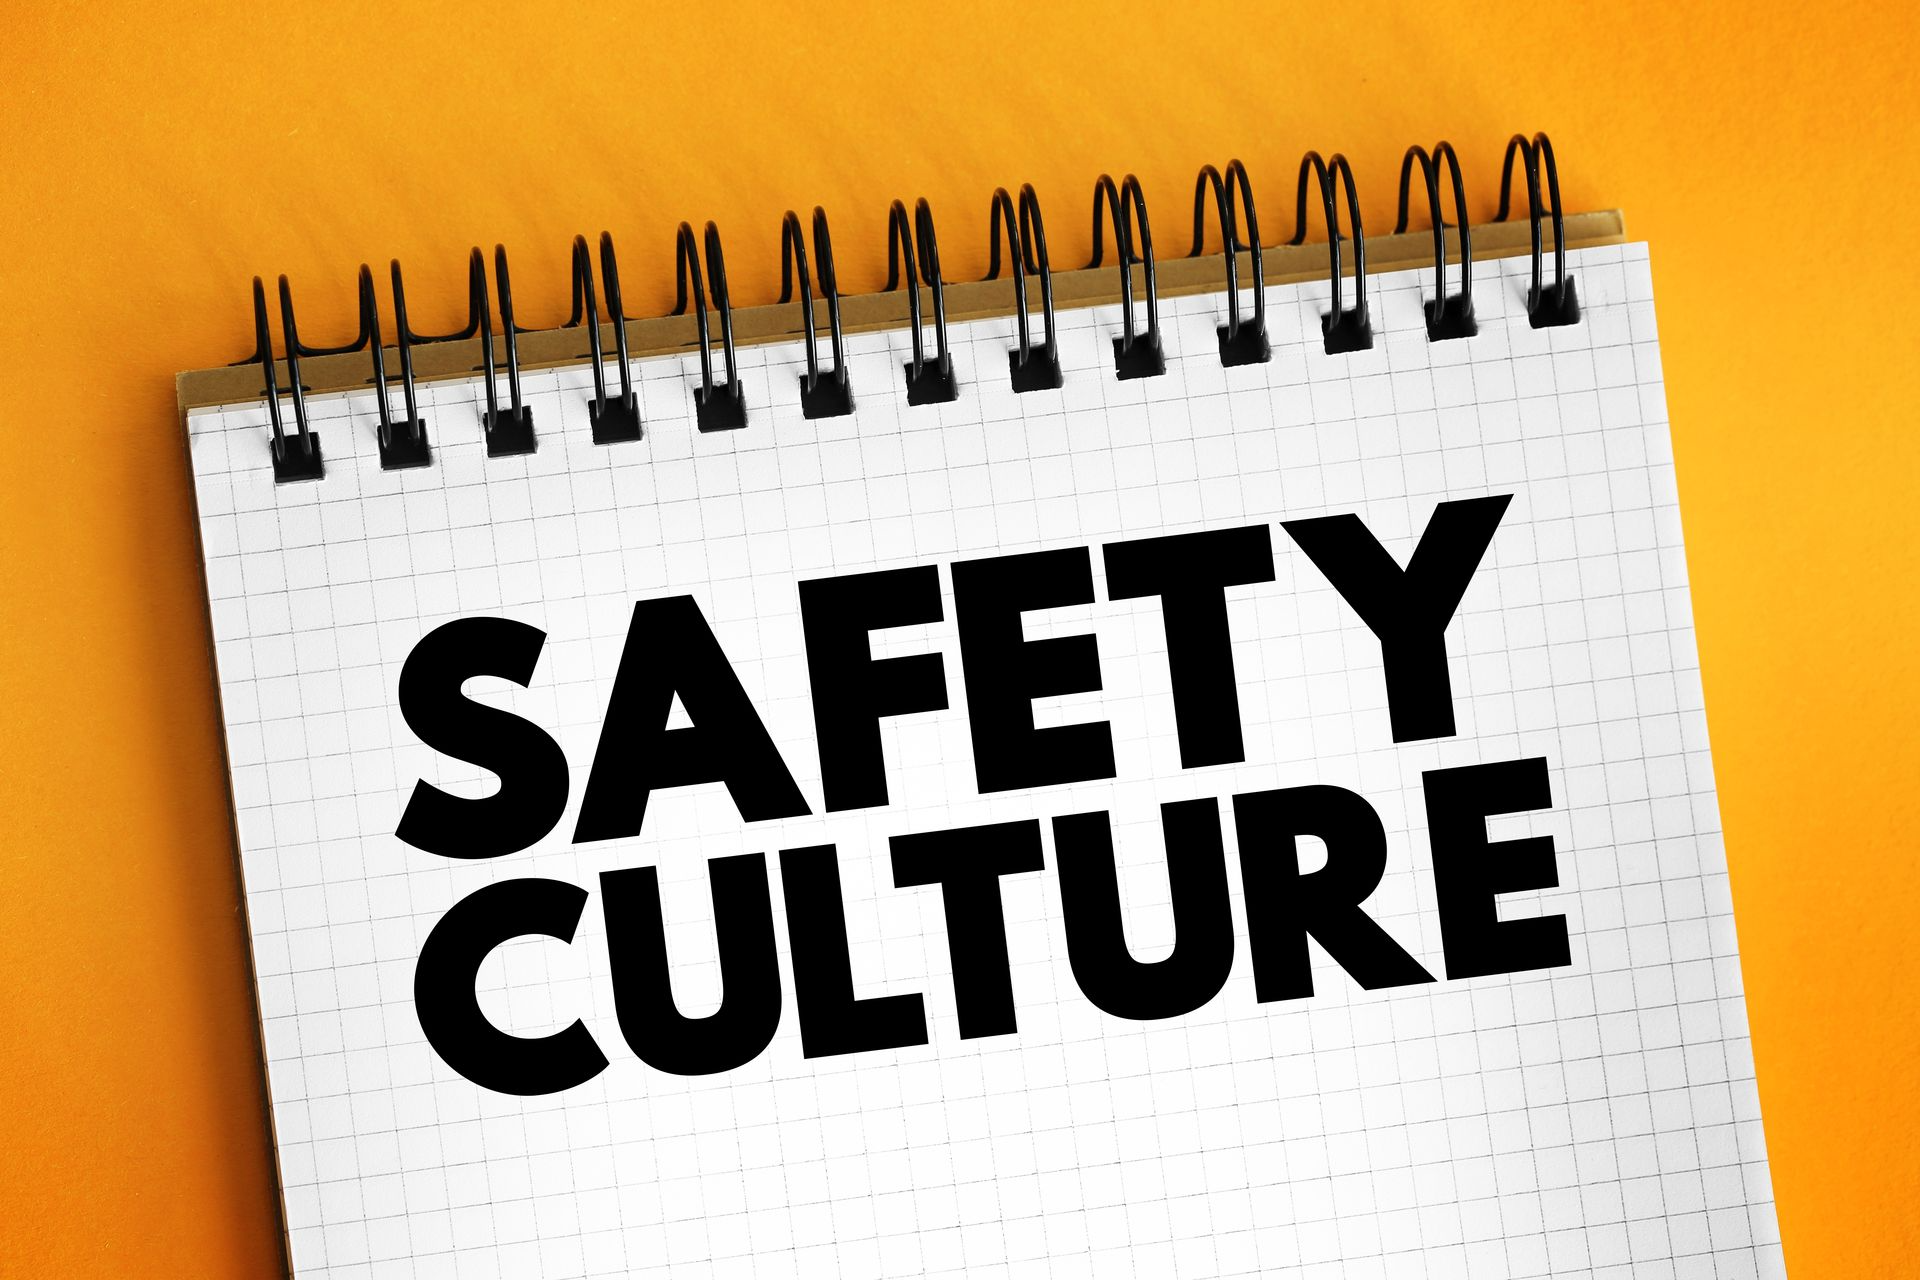 workplace safety culture is “the atmosphere created by (a shared set of) beliefs